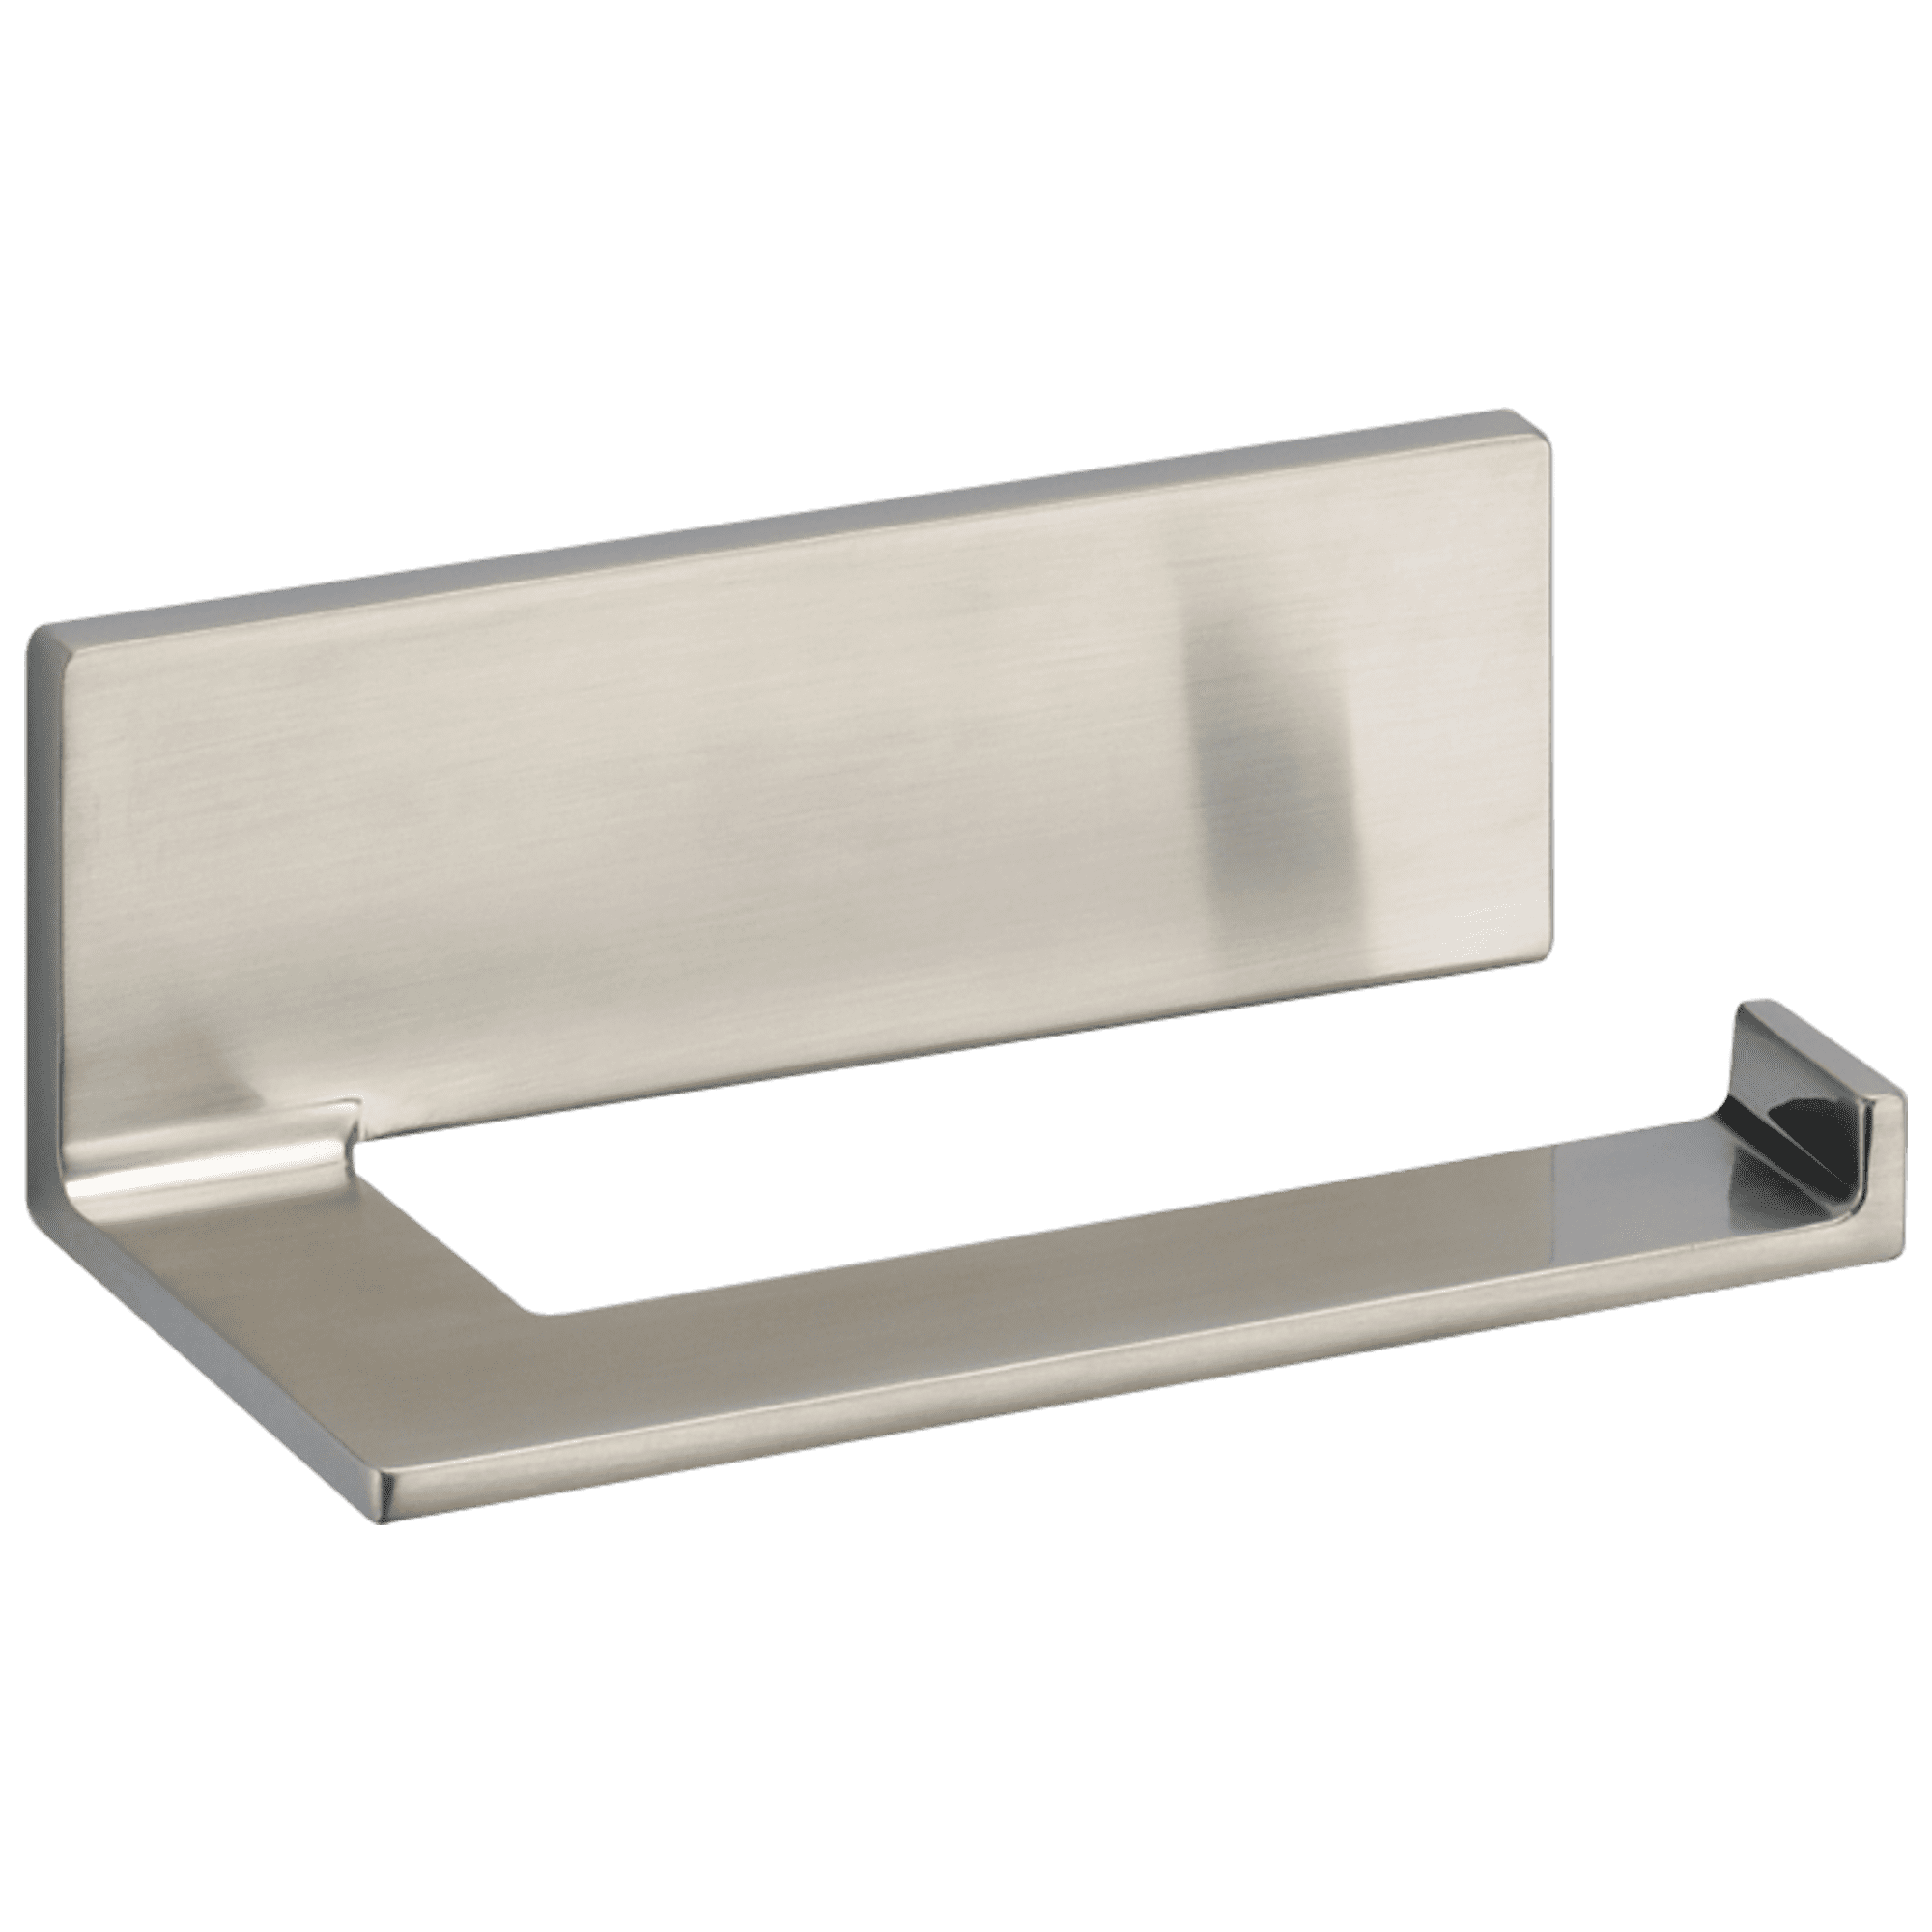 Delta 79750-ss Brilliance Stainless Cassidy Single Bar Tissue Holder for sale online 